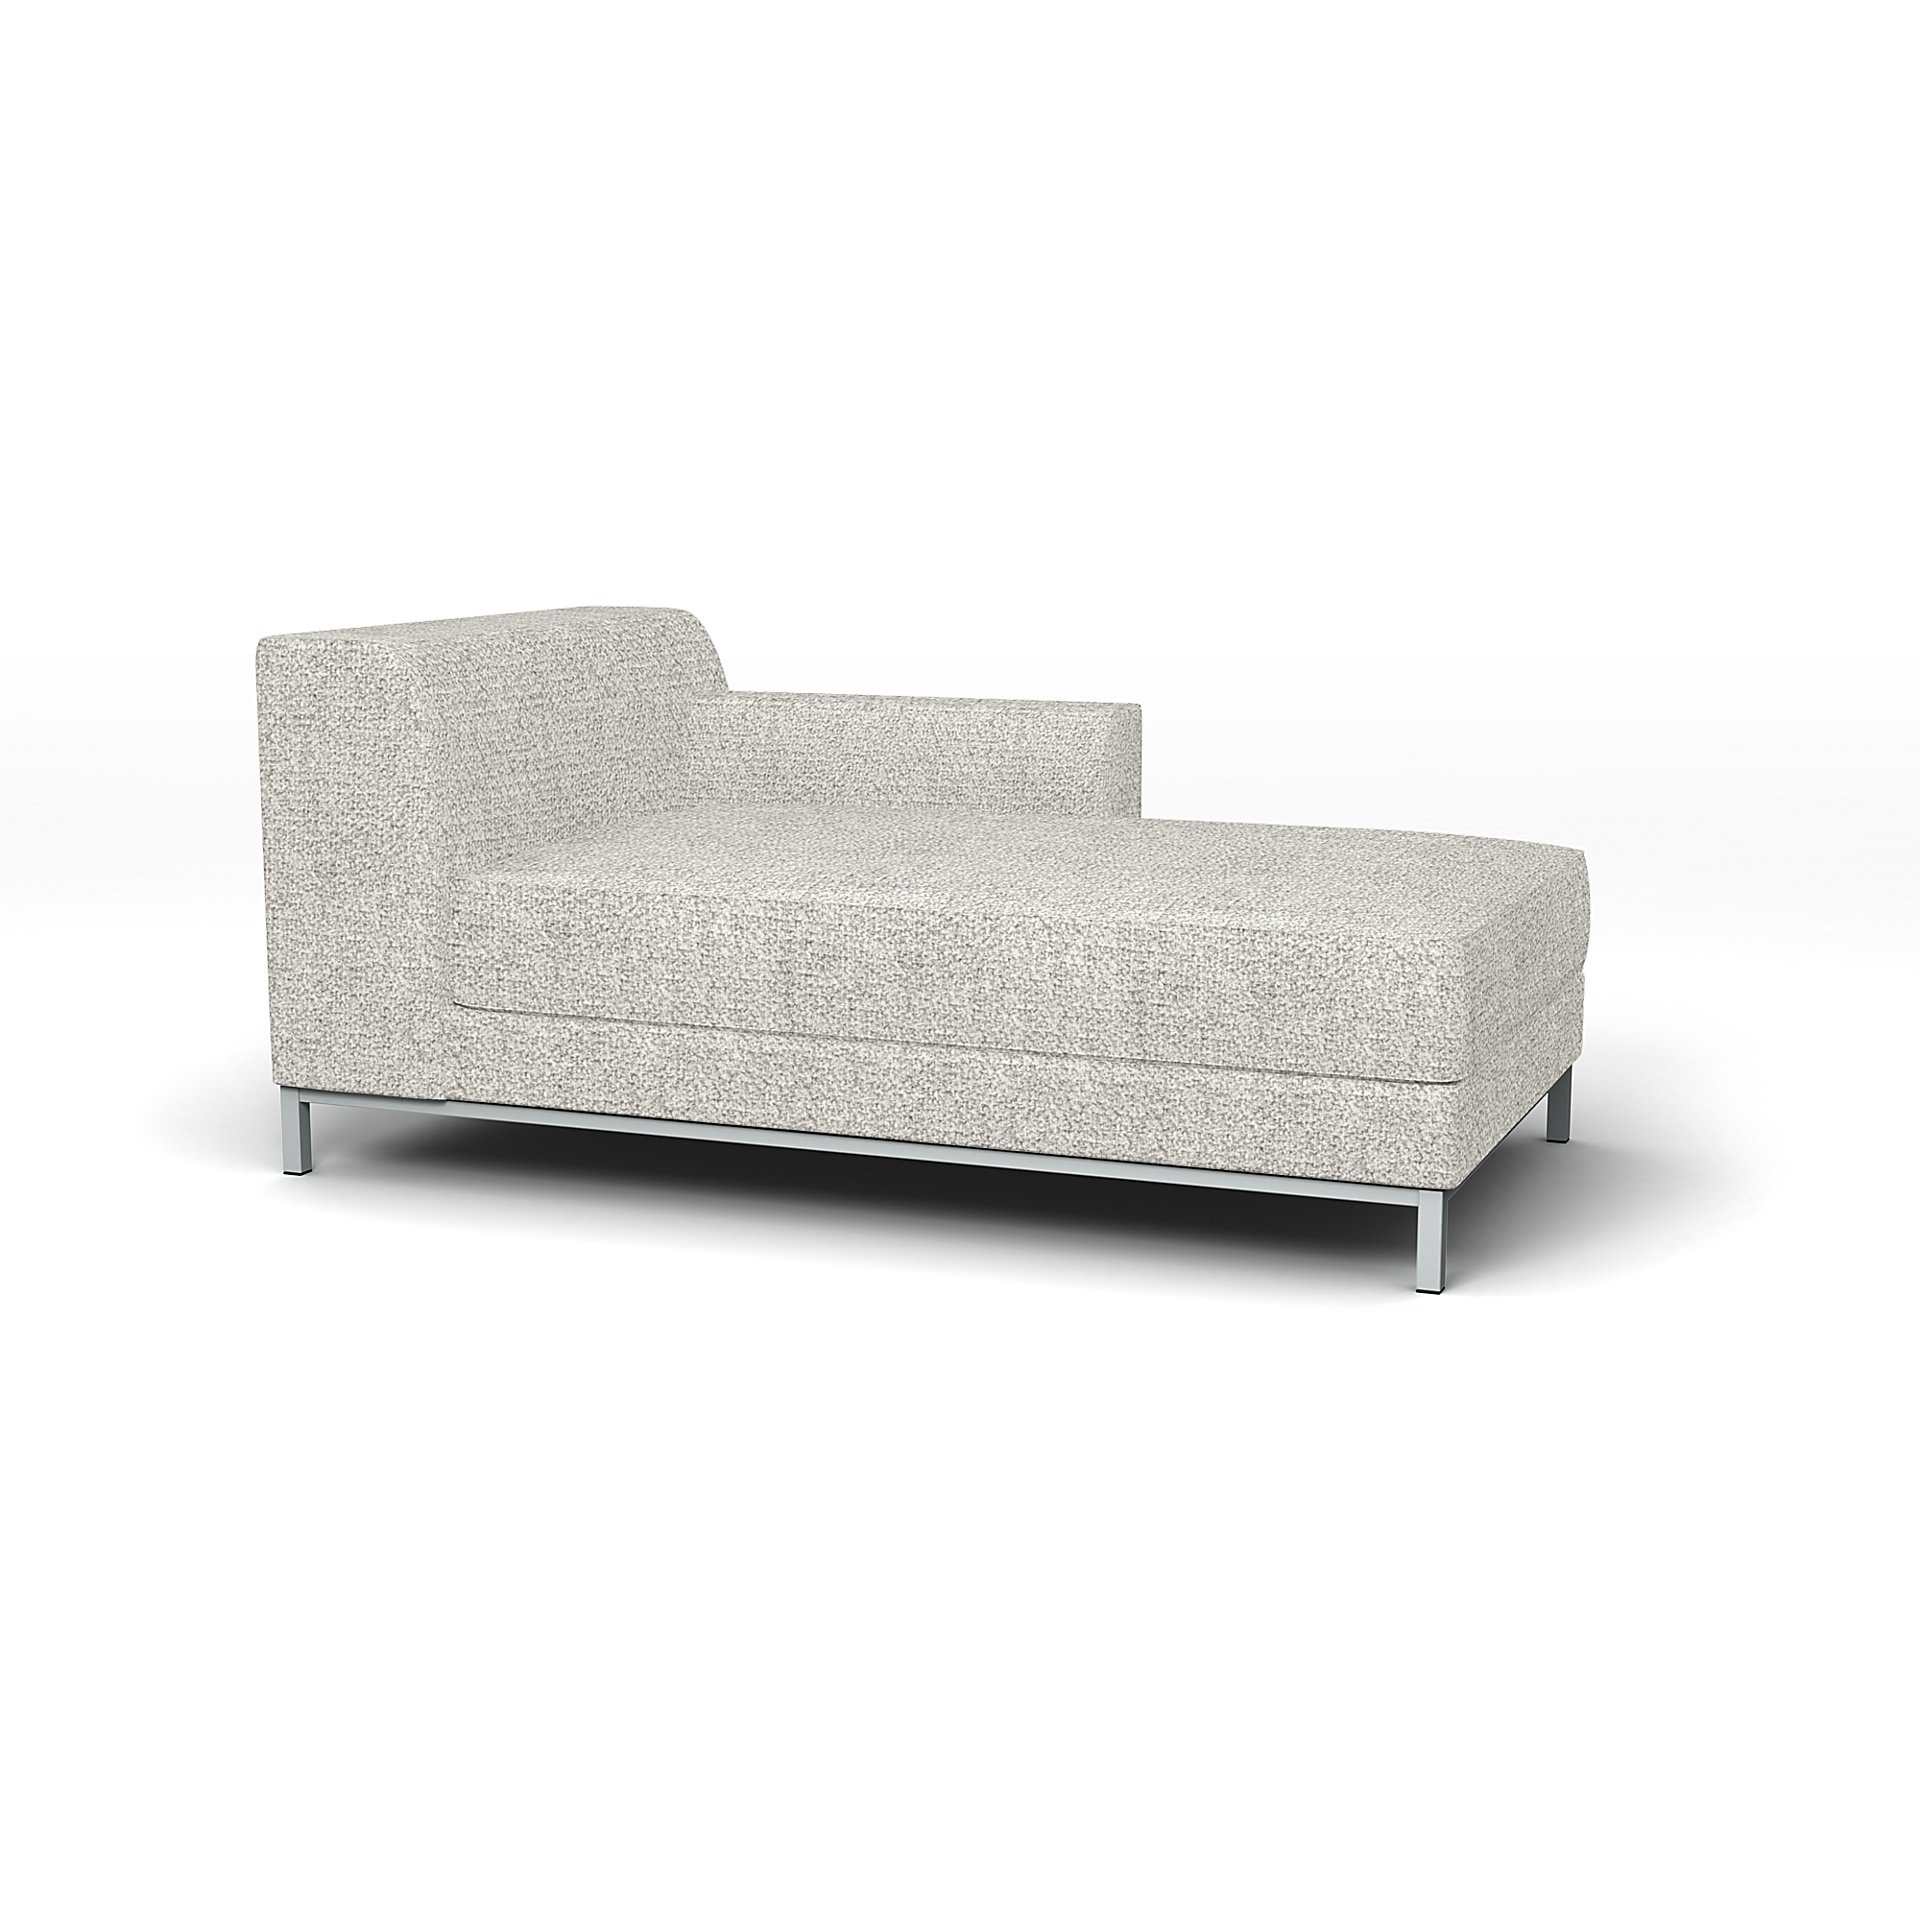 IKEA - Kramfors Chaise Longue with Right Arm Cover, Driftwood, Boucle & Texture - Bemz